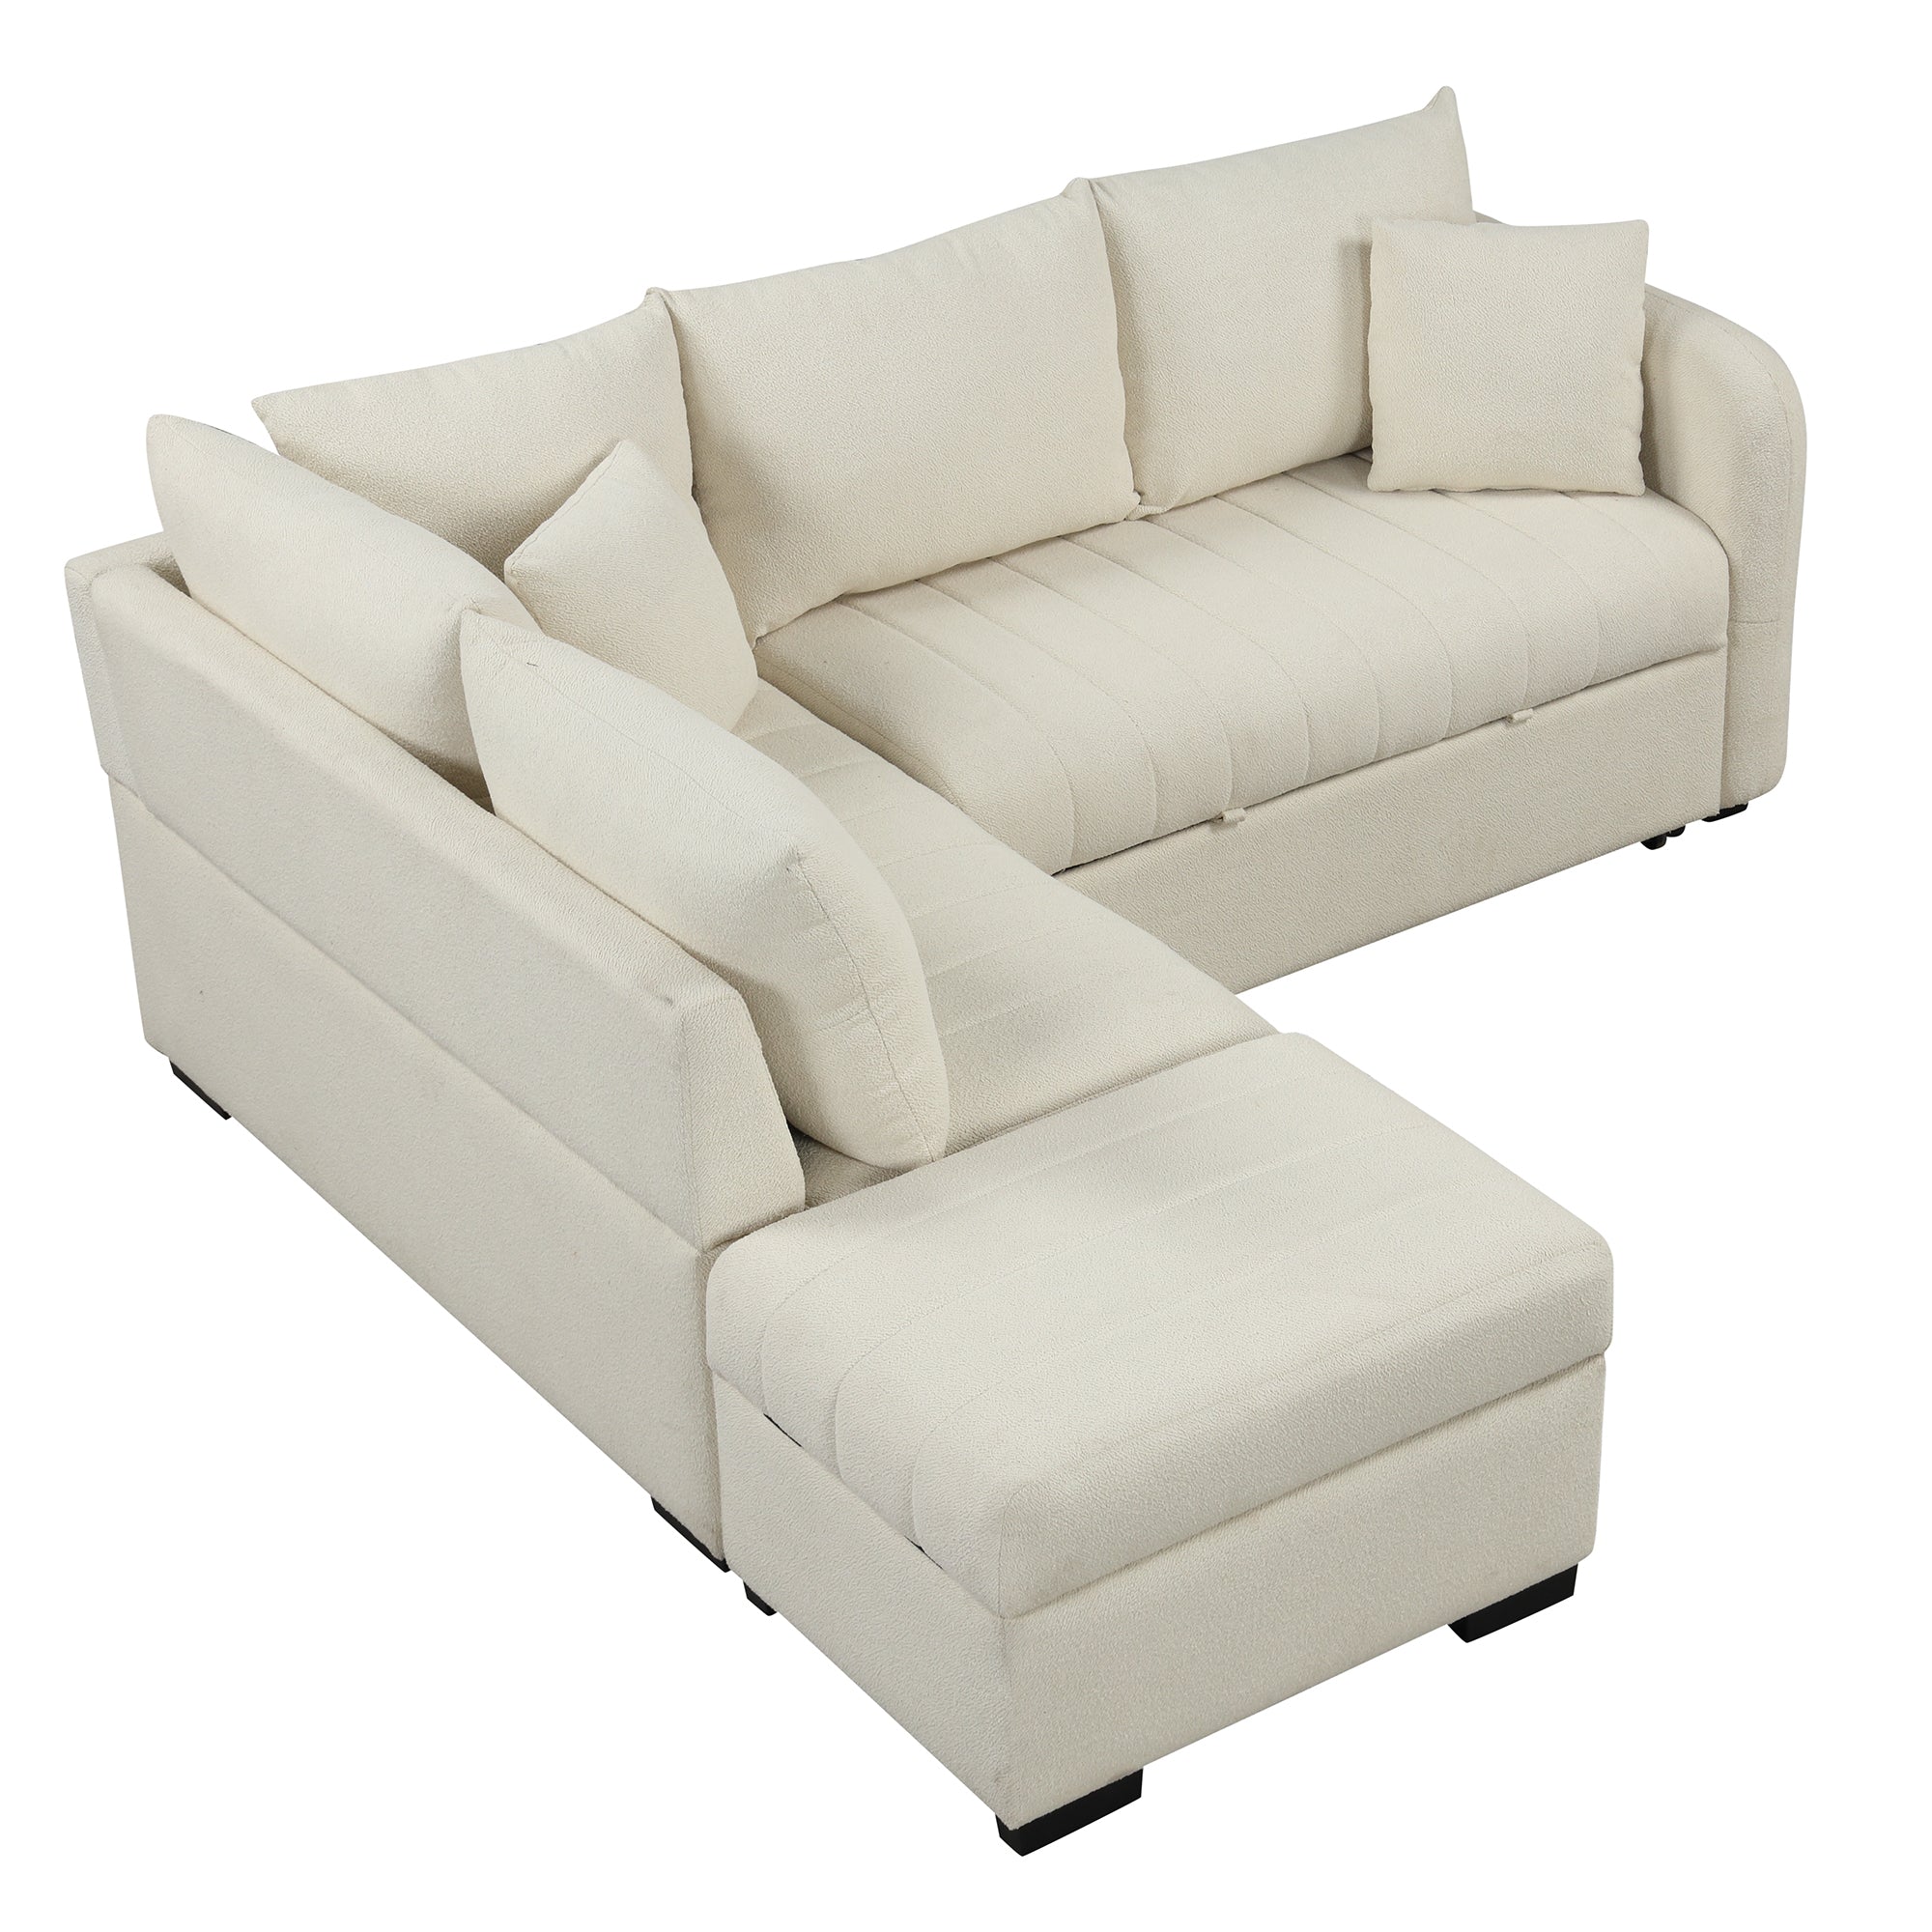 L-Shaped Sectional Sofa Bed w/ Storage Ottoman - Beige